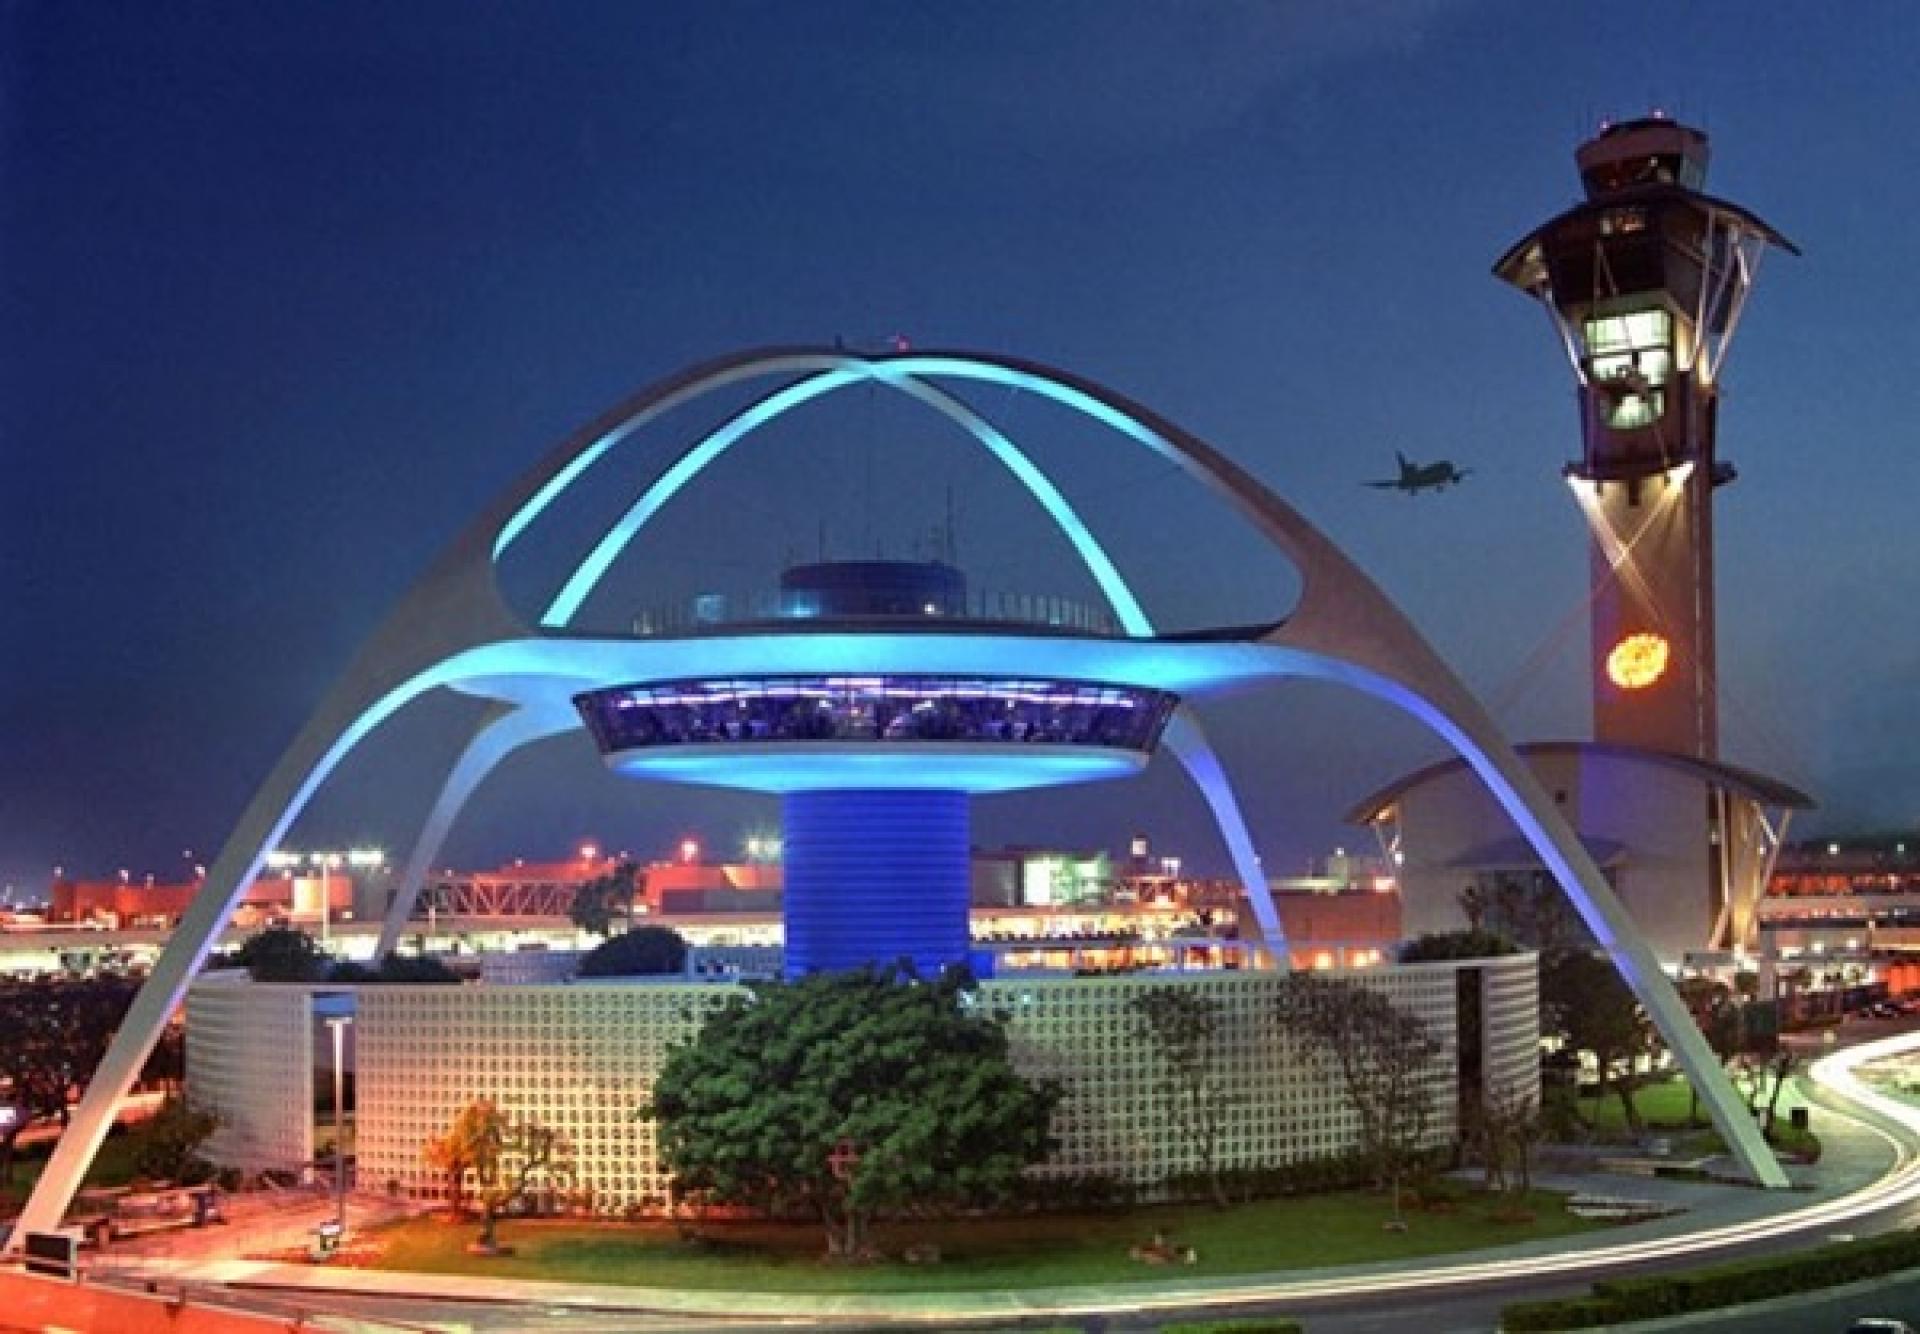 Sklarek’s best known project is renovation of Terminal One at Los Angeles International Airport (LAX).